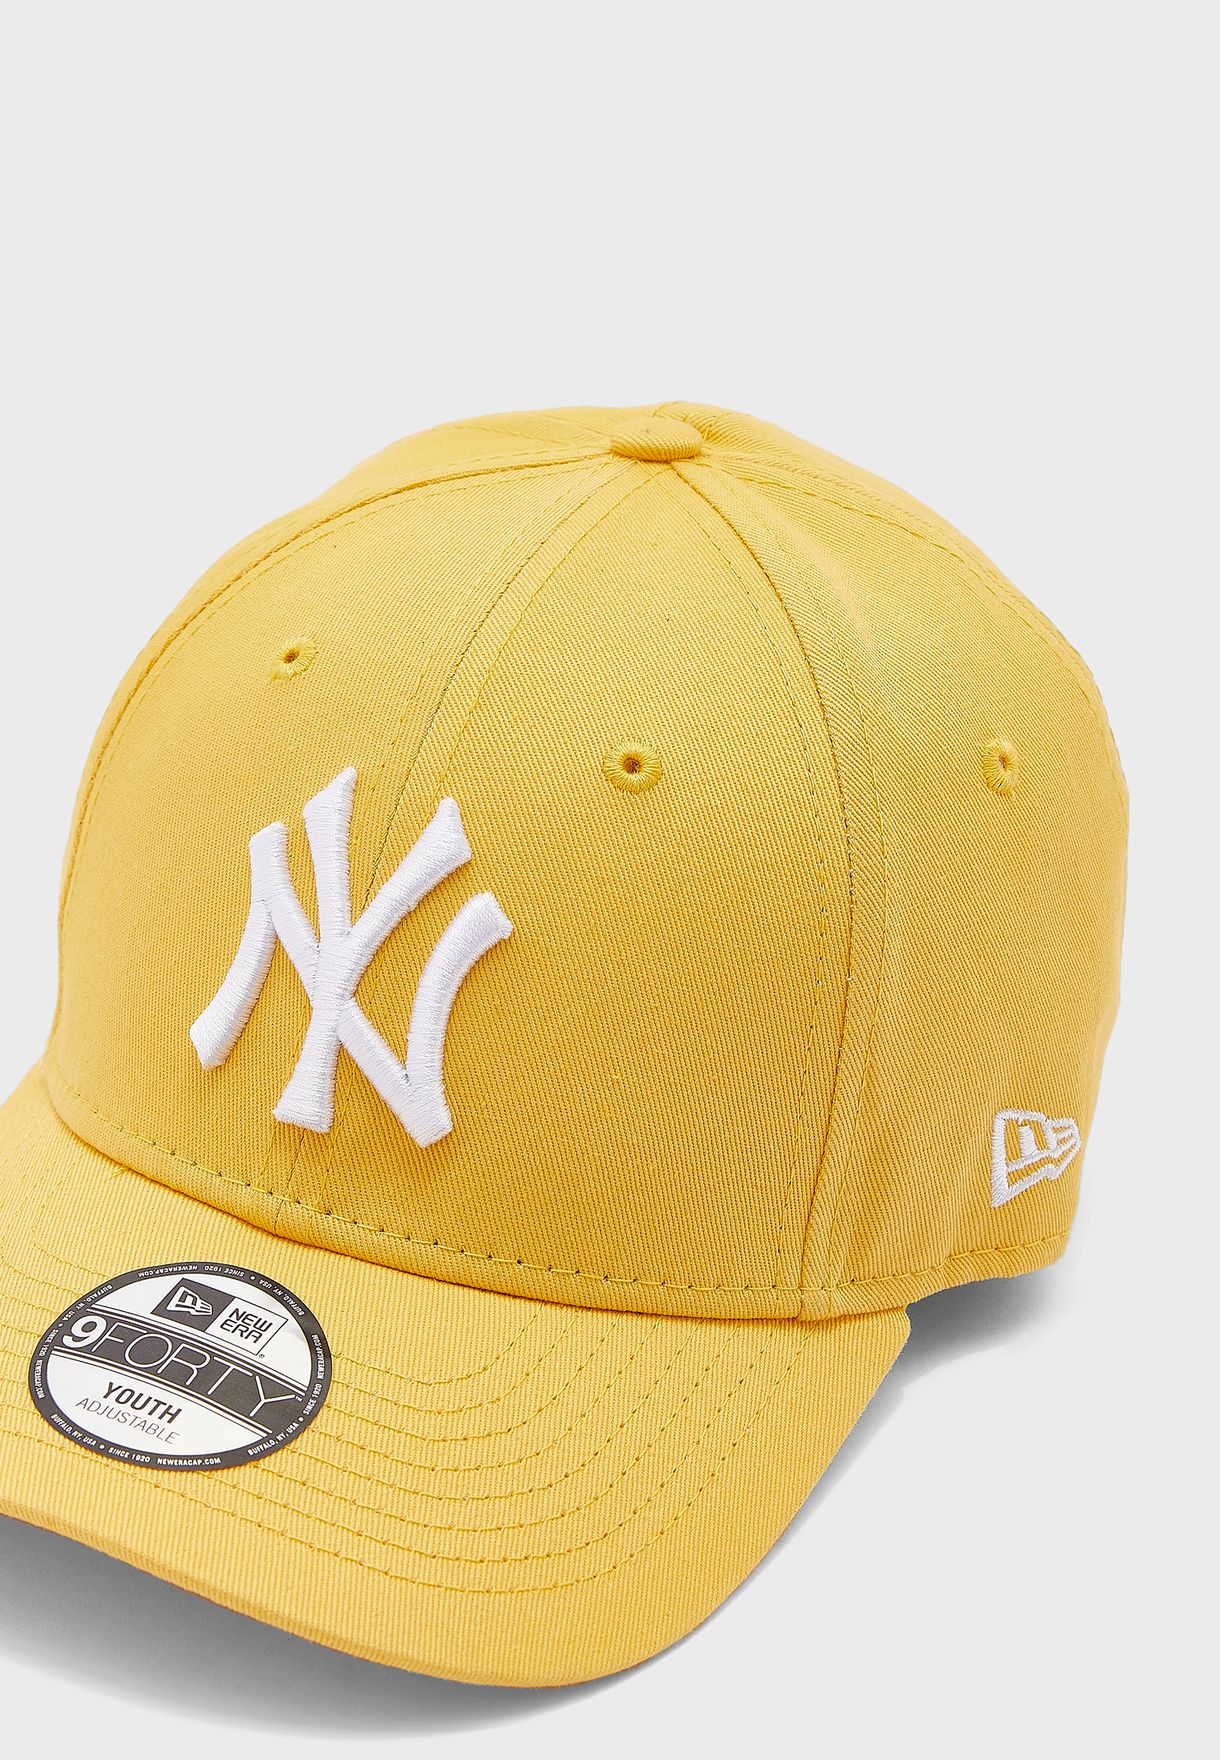 Youth 9Forty New York Yankees League Cap